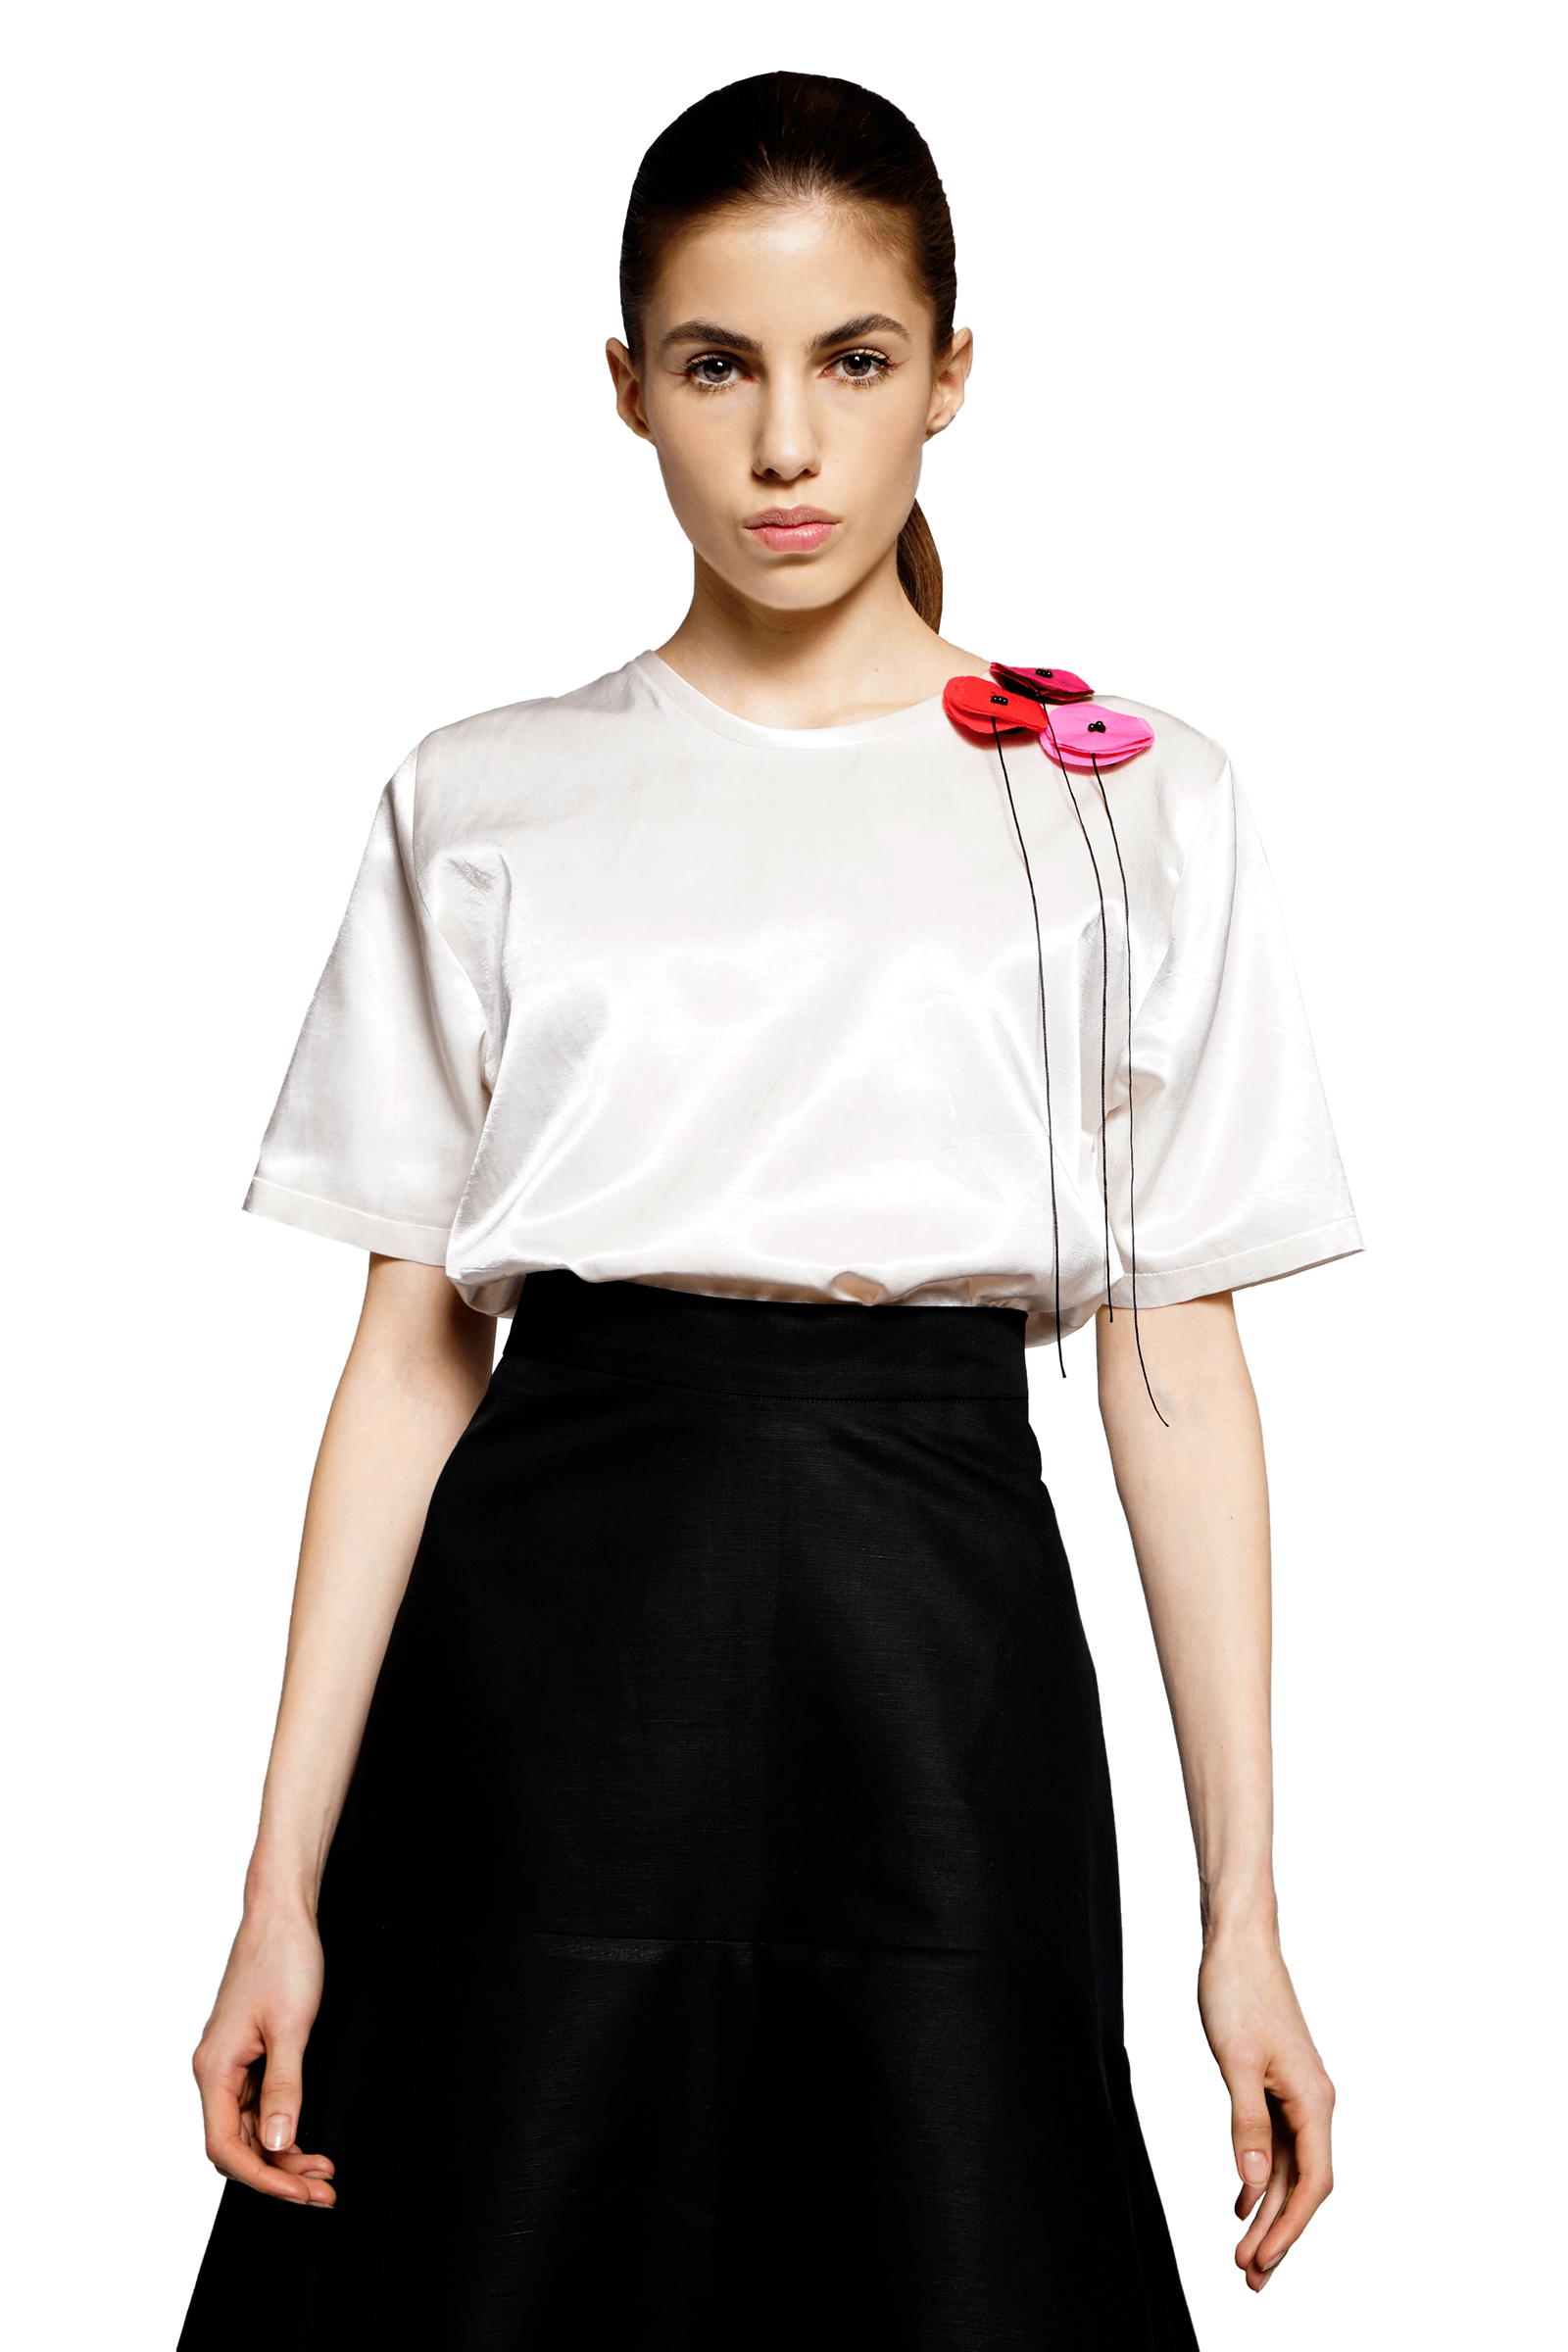 Satin white top with poppies